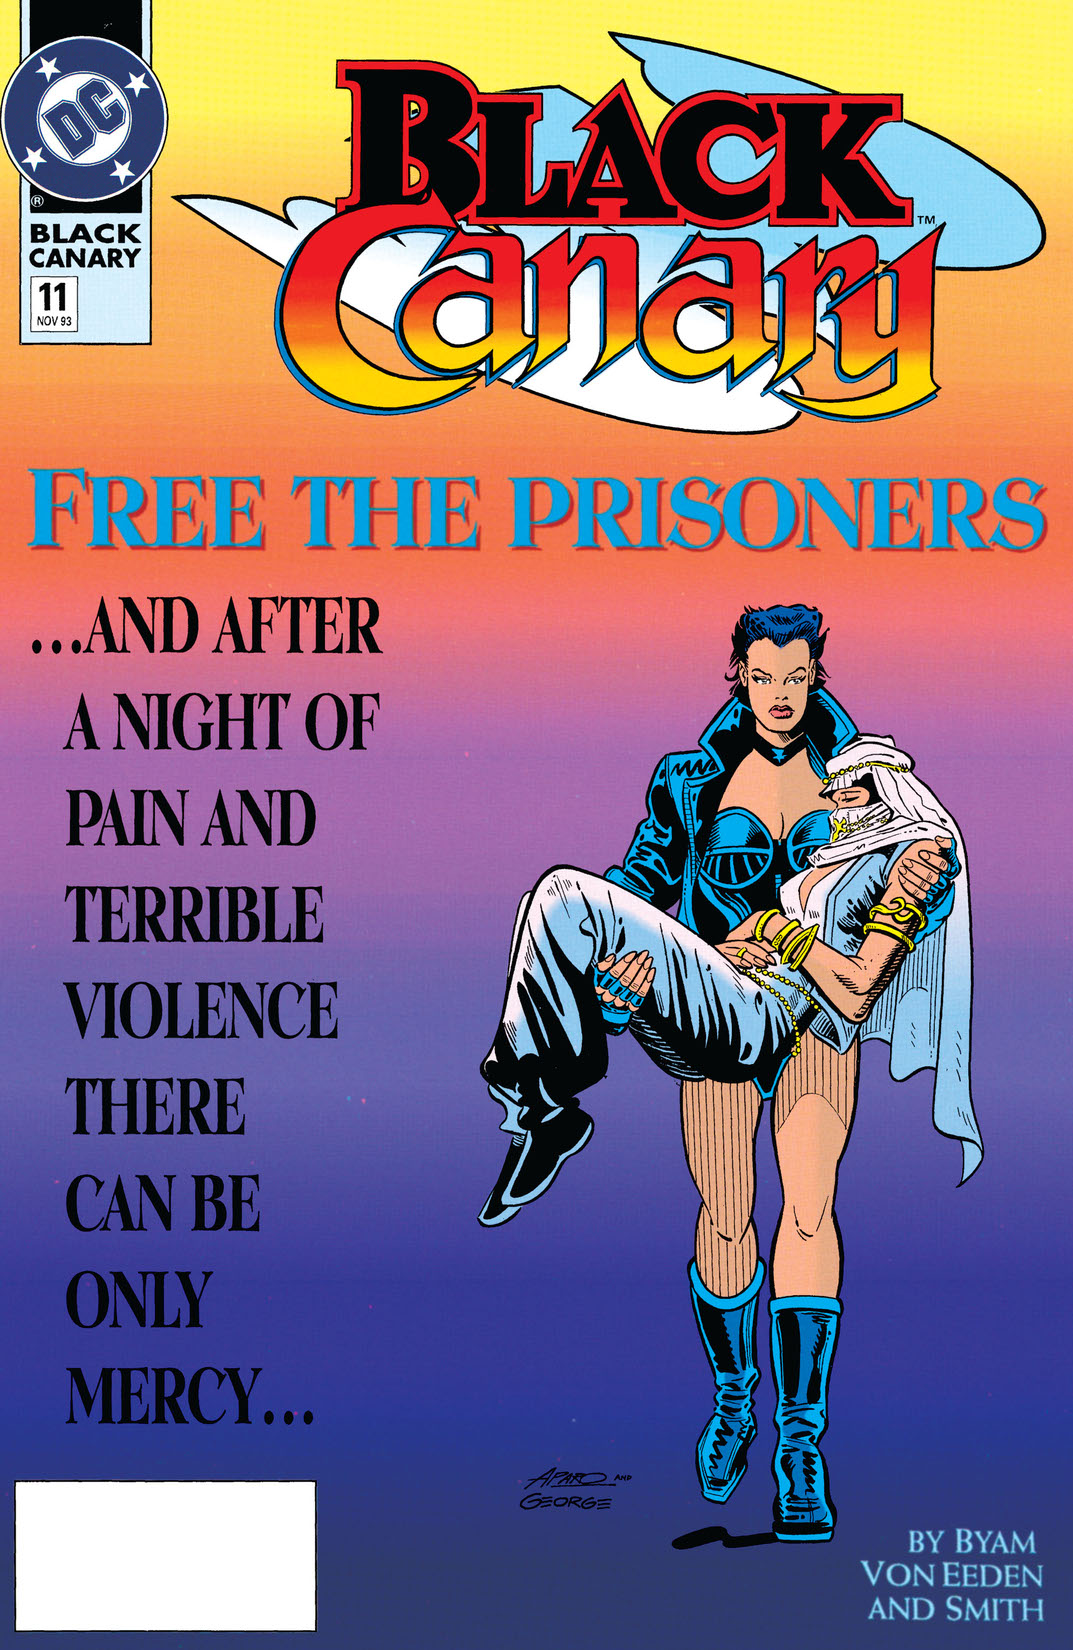 Black Canary (1992-) #11 preview images